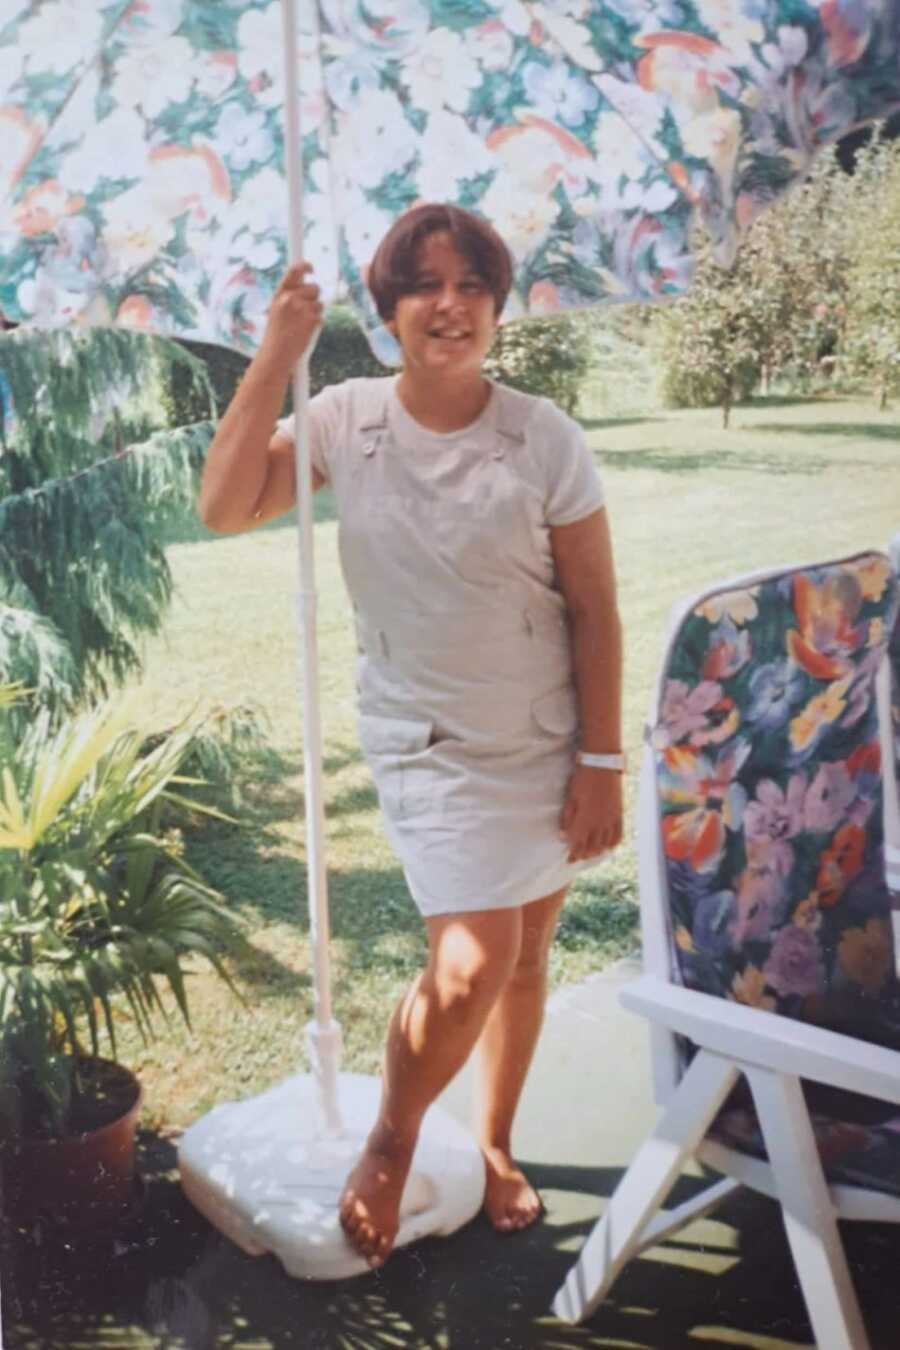 sexual abuse and eating disorder survivor posing under umbrella